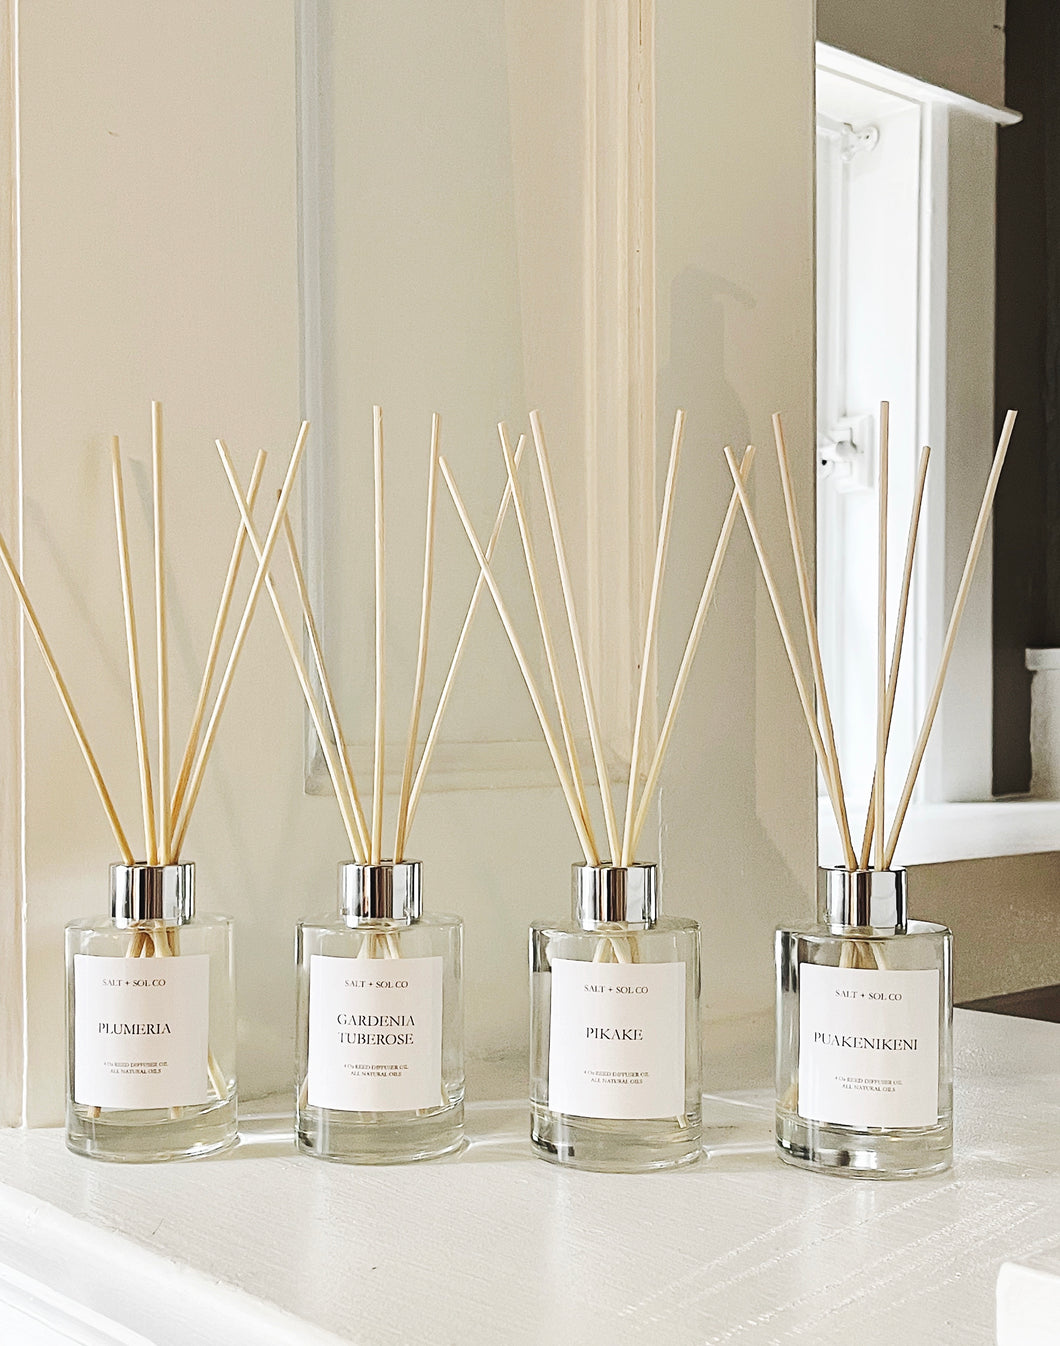 Luxury Reed Diffusers for sale at salt + sol co candles.